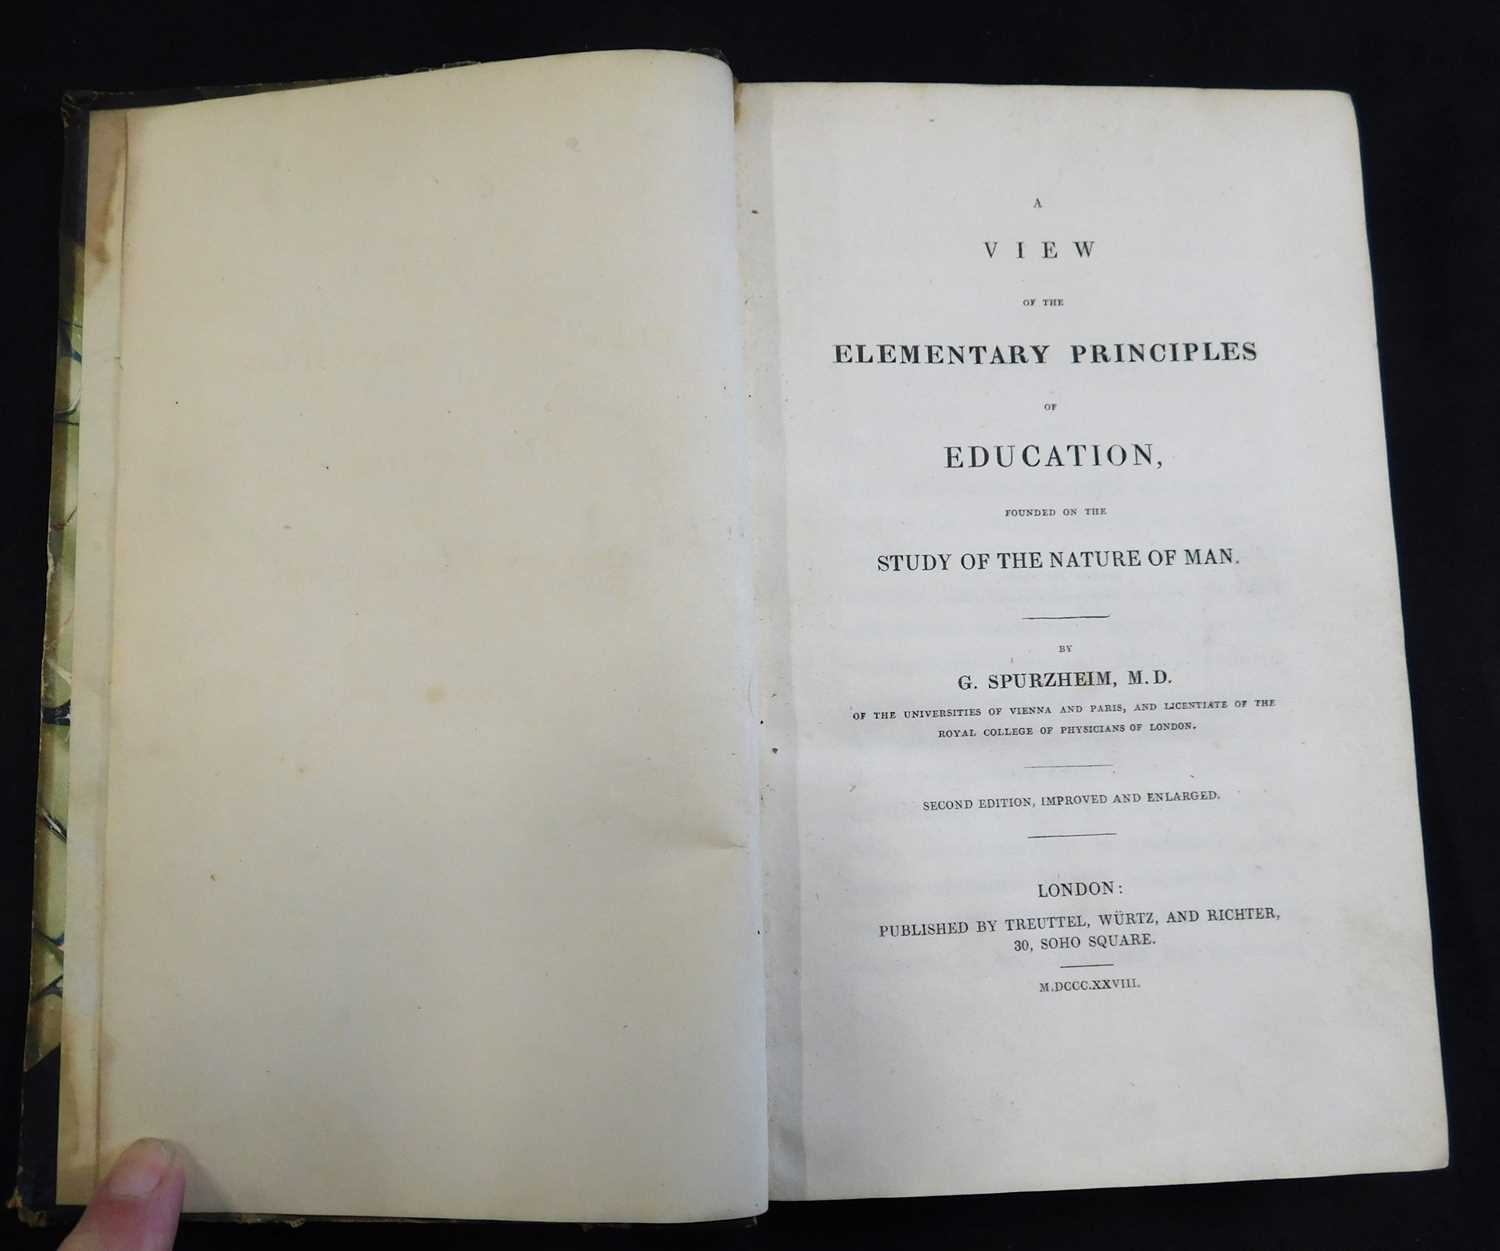 JOHANN GASPER SPURZHEIM: A VIEW OF THE ELEMENTARY PRINCIPLES OF EDUCATION FOUNDED ON THE STUDY OF